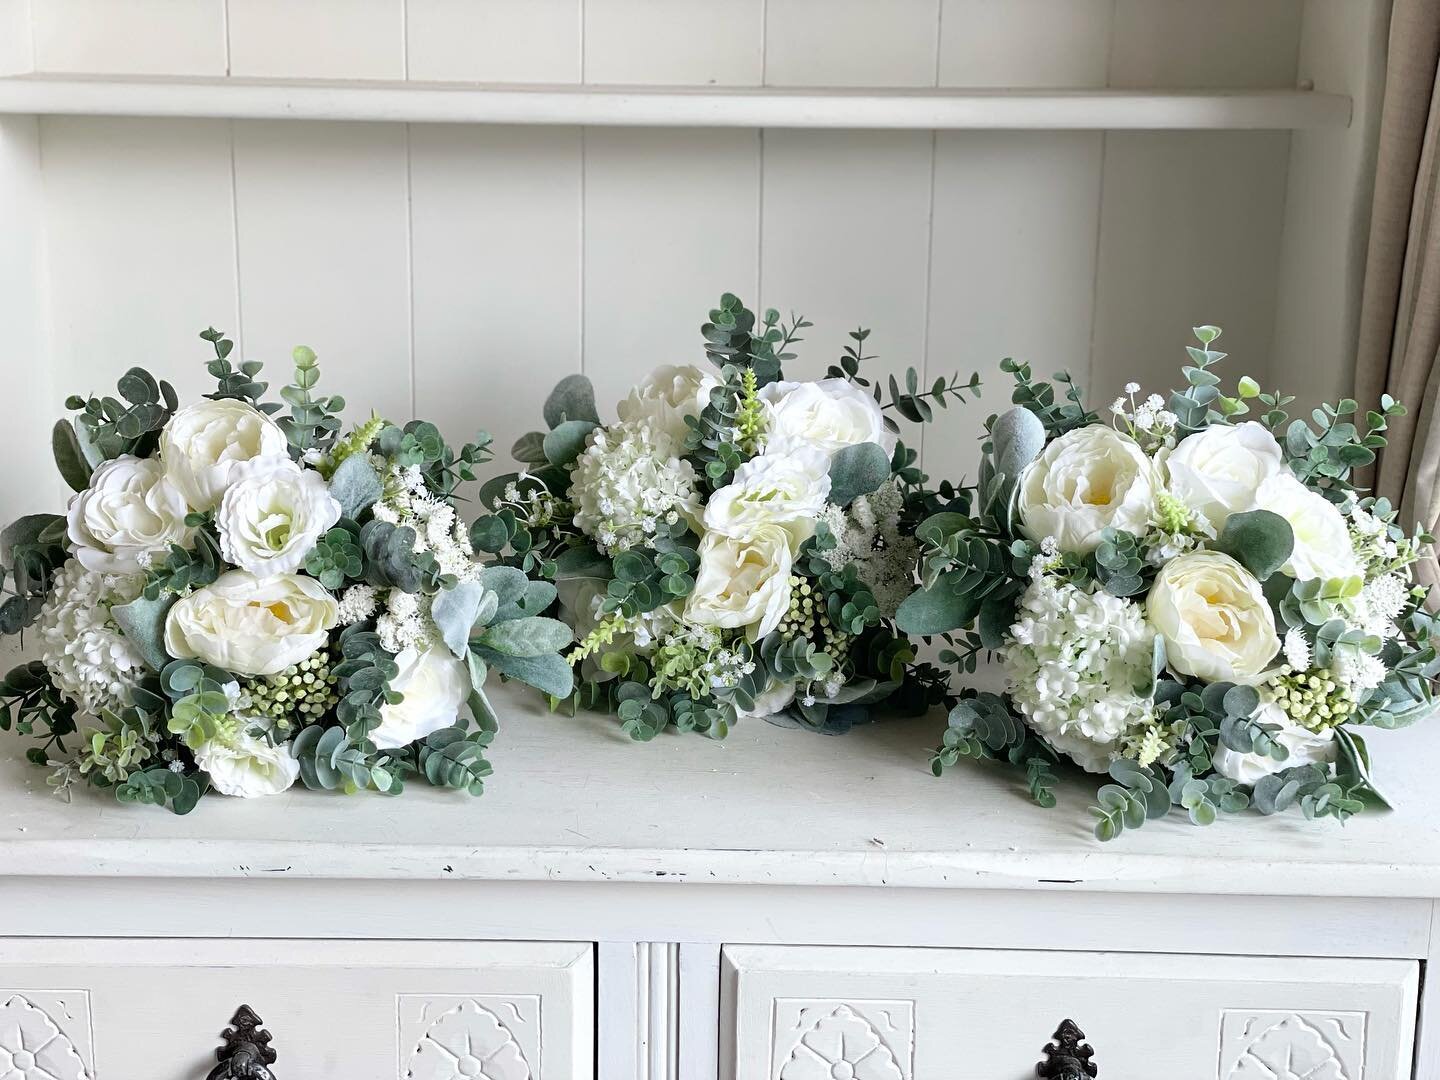 Beautiful bridesmaids bouquets including roses, peonies, lisianthus, Queen Anne&rsquo;s lace and gypsophila mixed with eucalyptus and lambs ear foliage #weddingflowers #weddingbouquet #bridesmaidbouquet